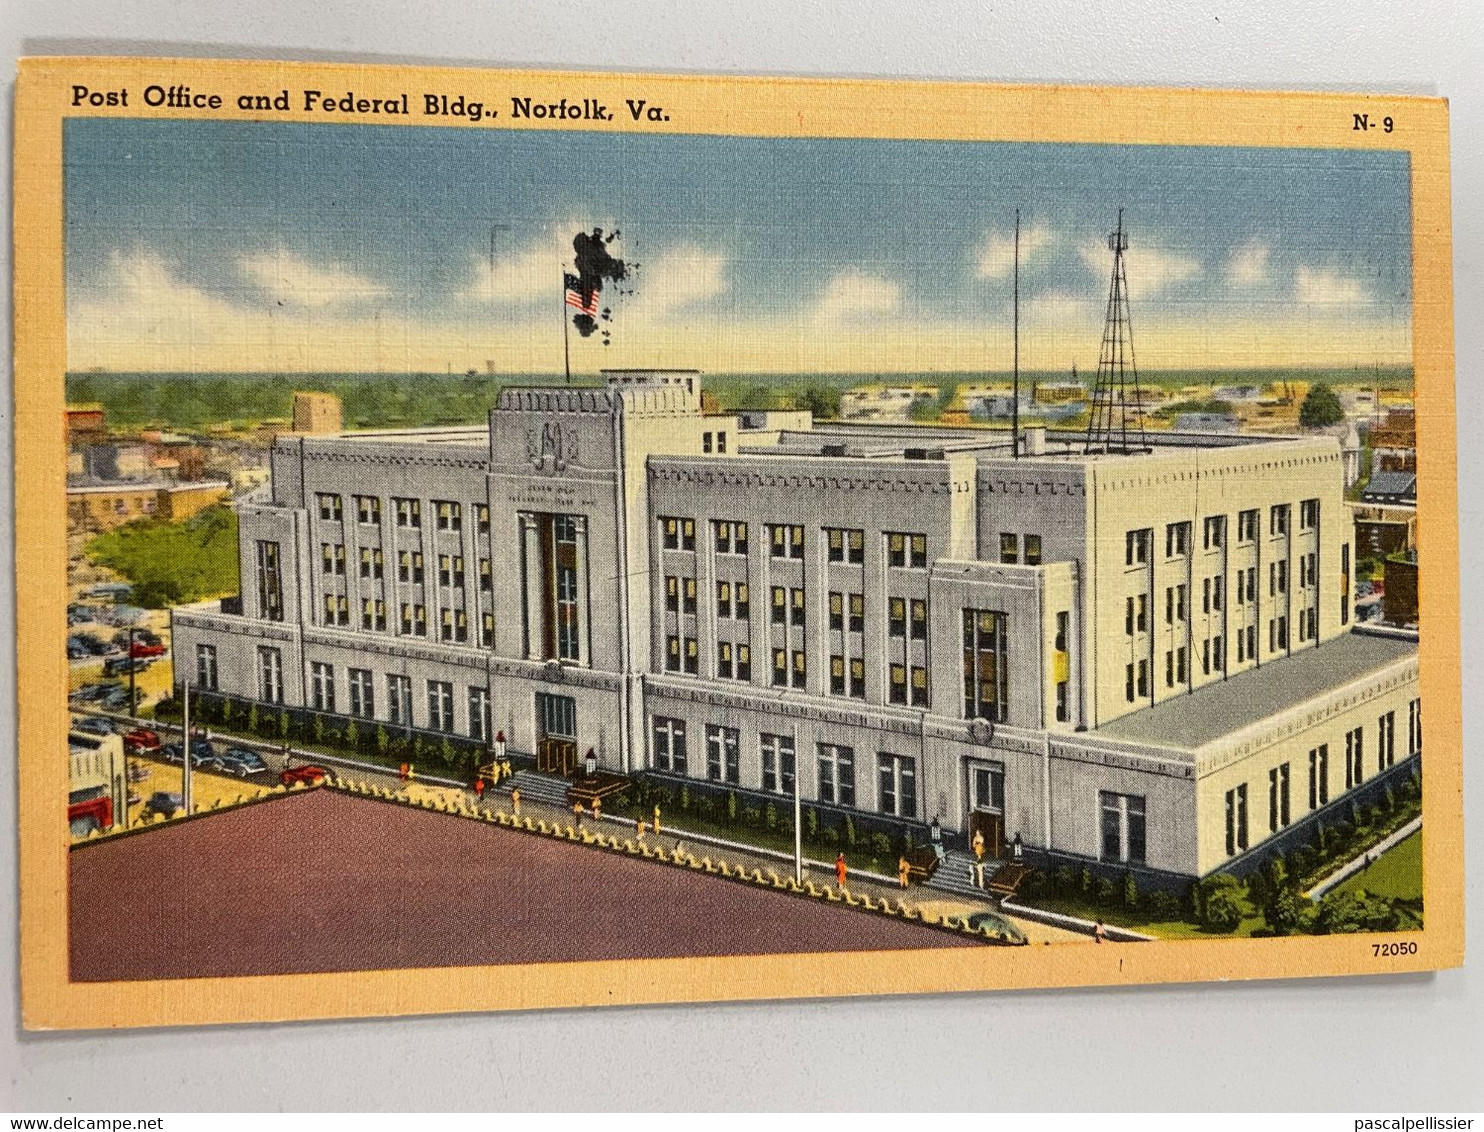 CPSM - ETATS UNIS - NORFOLK - Post Office And Federal Bldg. - 2 Scans Timbres Taxe A Payer Pays Bas 60c Et 1.80fr - Norfolk